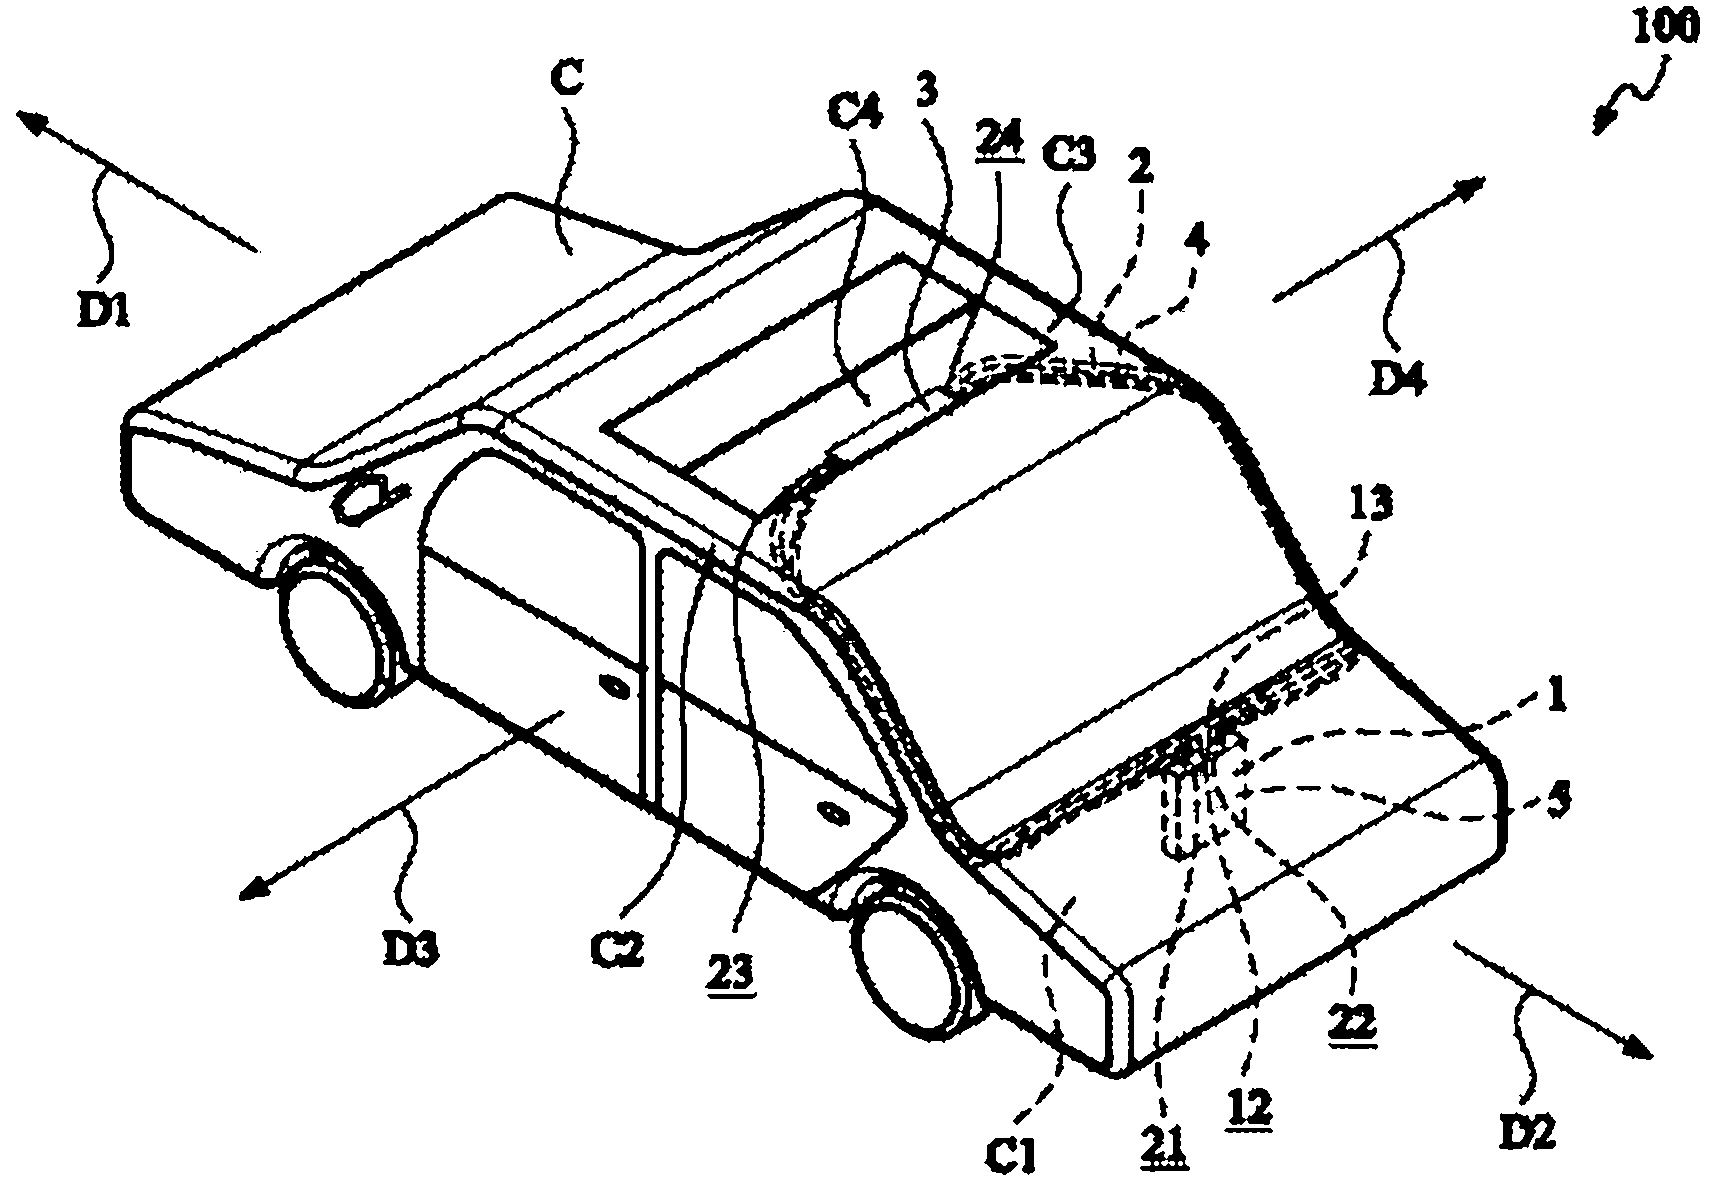 Car cover device